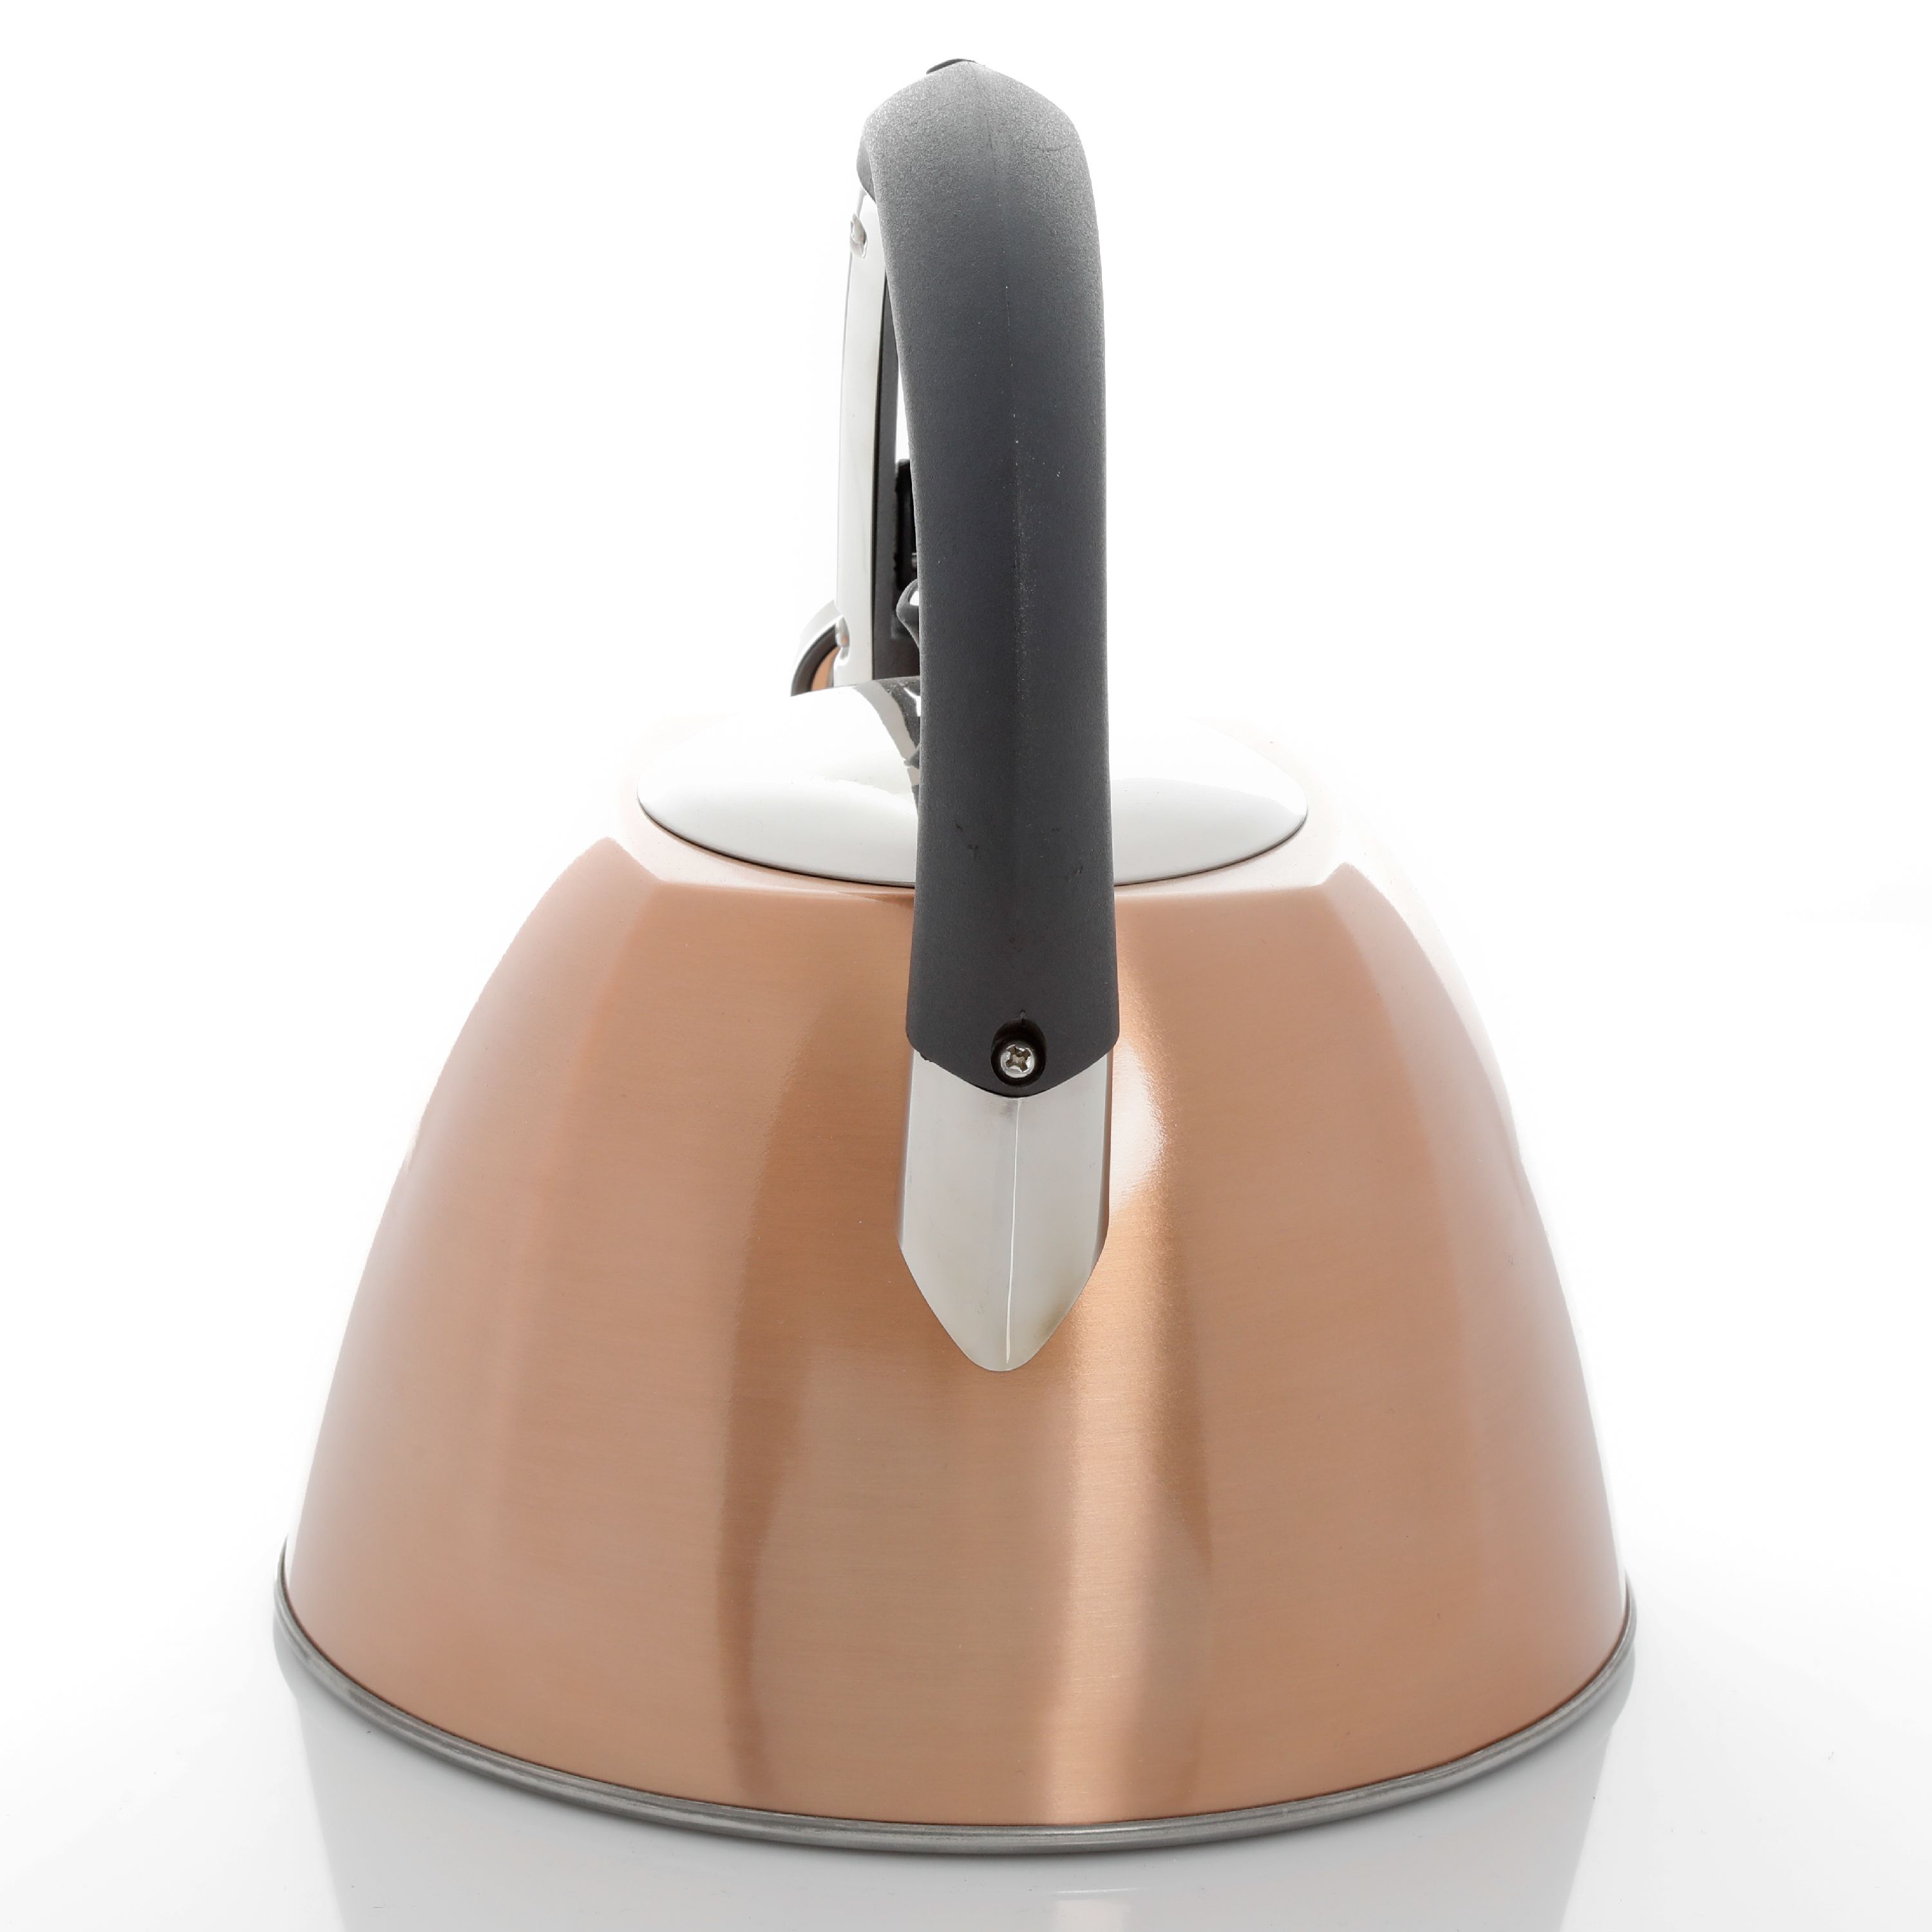 Mr. Coffee Belgrove 2.5 Quart Stainless Steel Tea Kettle in Copper - image 5 of 7